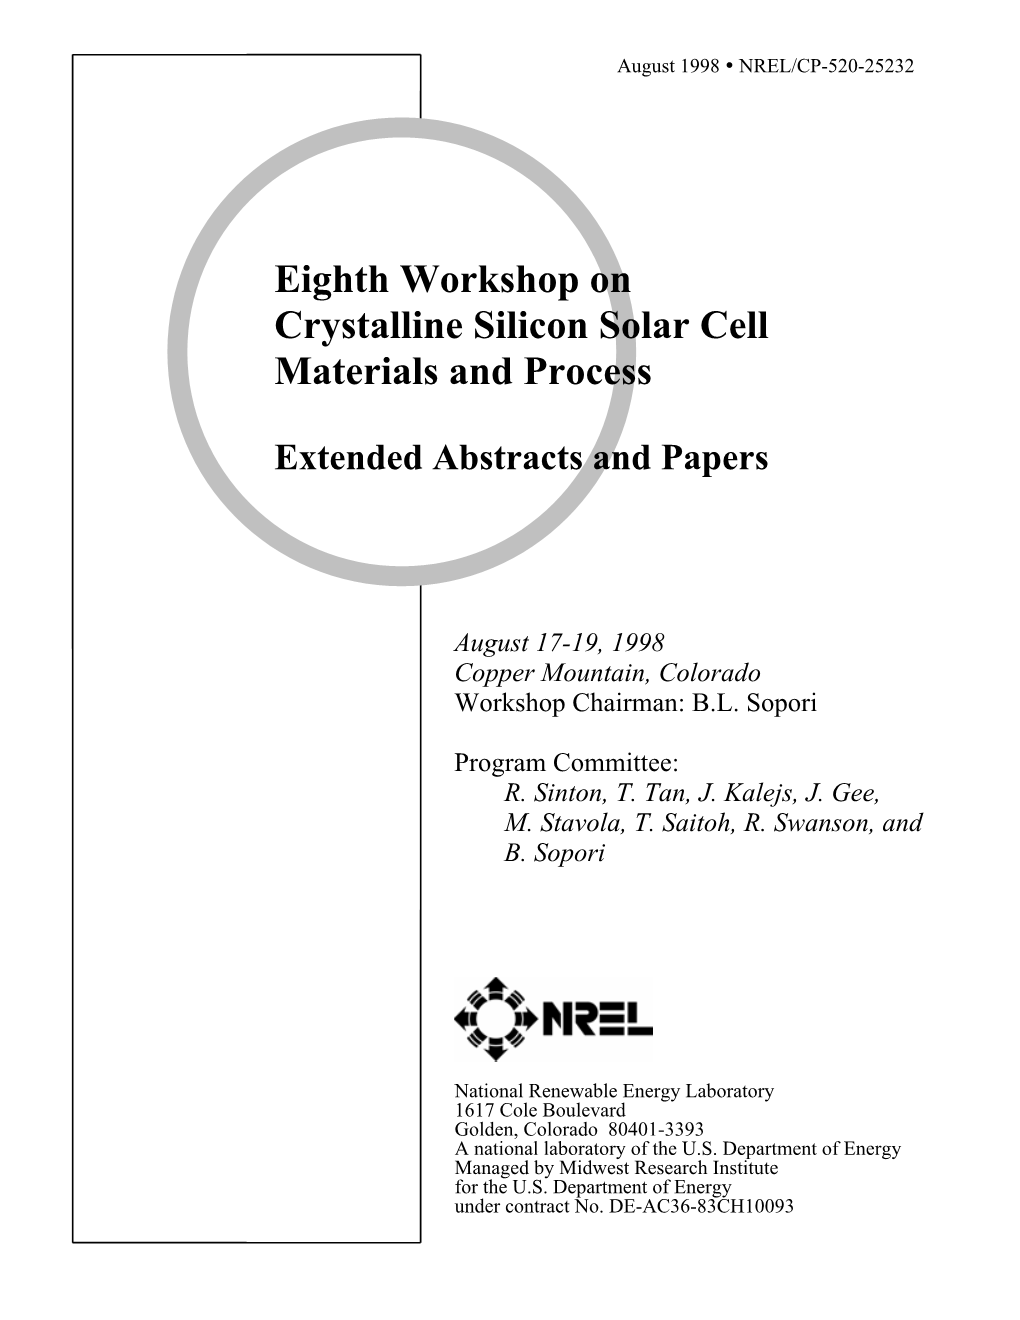 Eighth Workshop on Crystalline Silicon Solar Cell Materials and Process